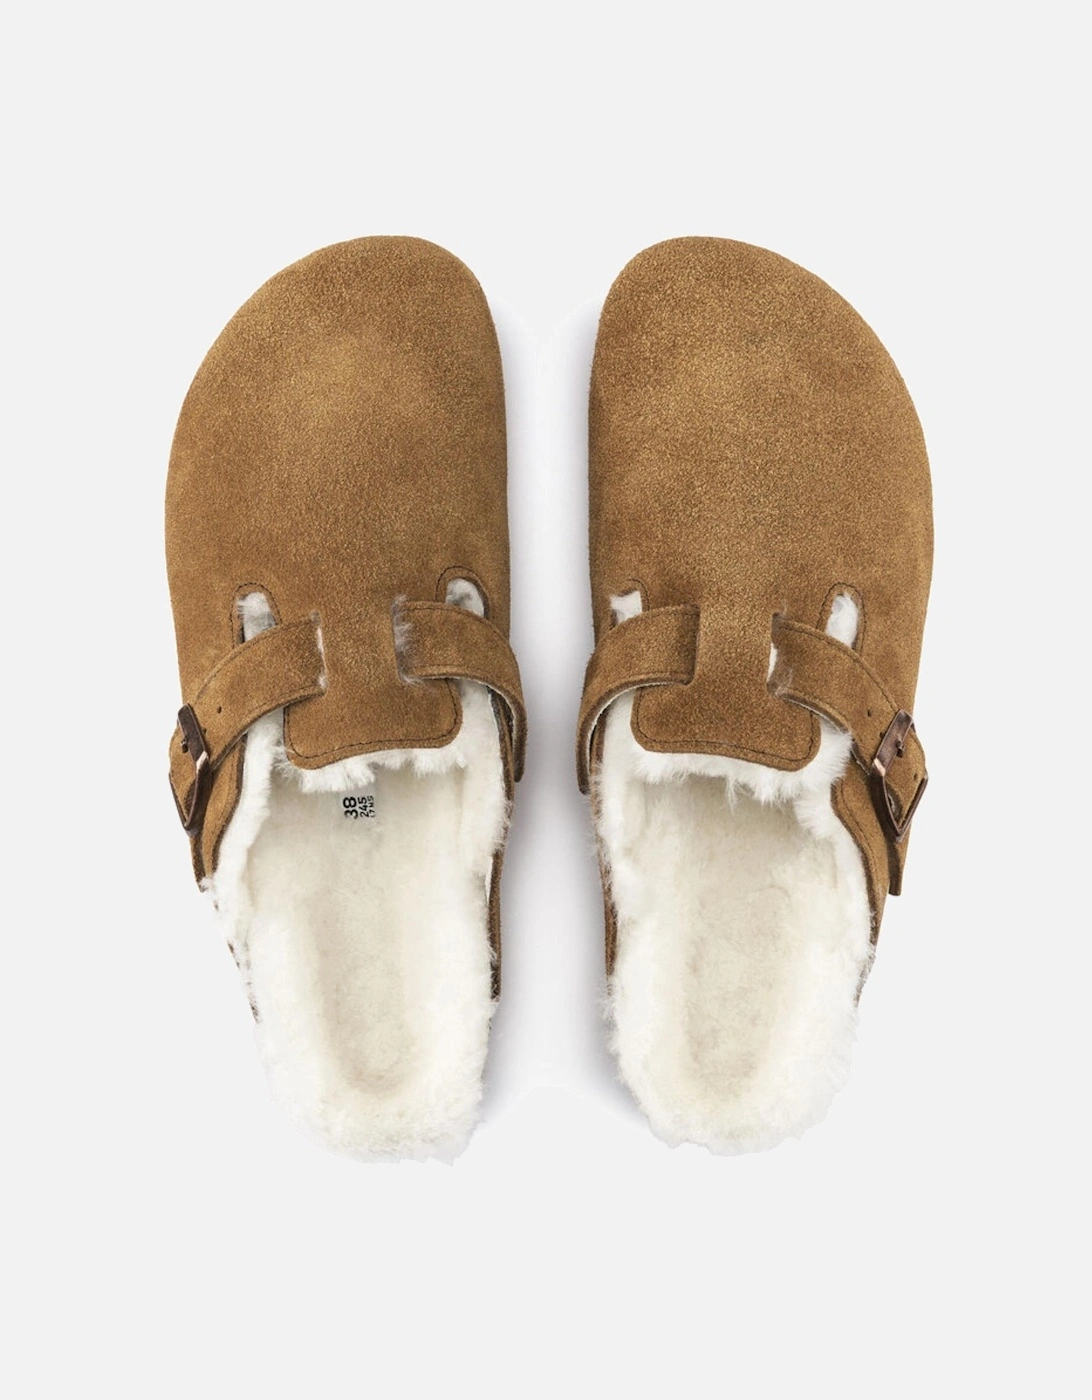 Boston Suede Leather Shearling Mink